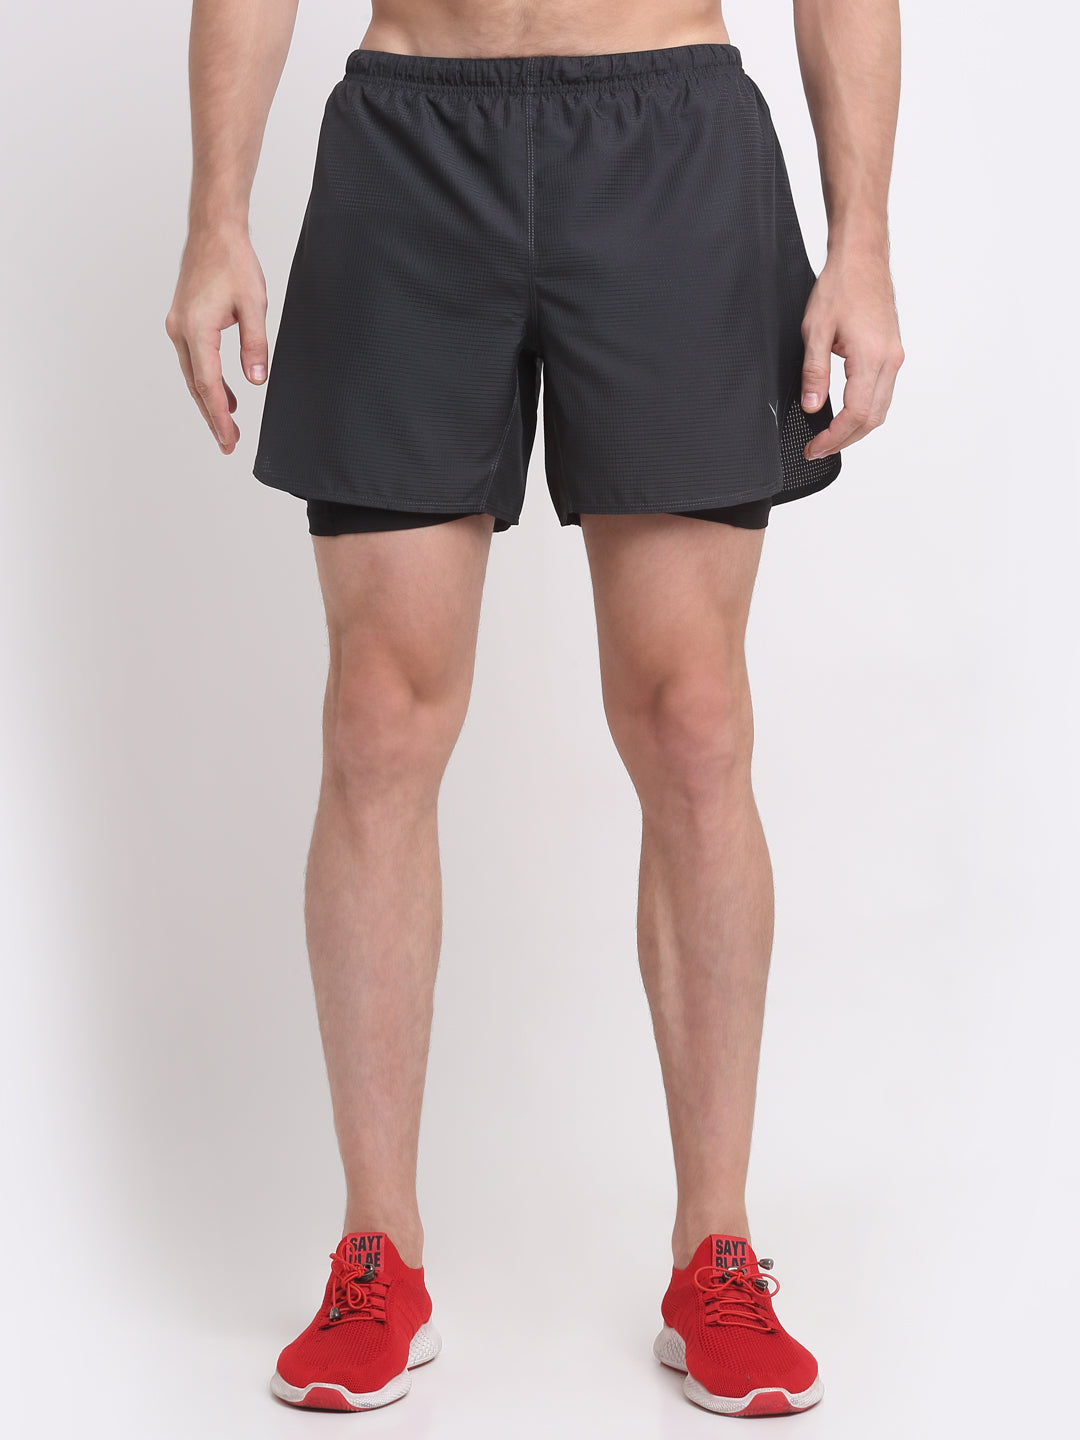 Invincible Men's Double Layered Long Distance Running Shorts